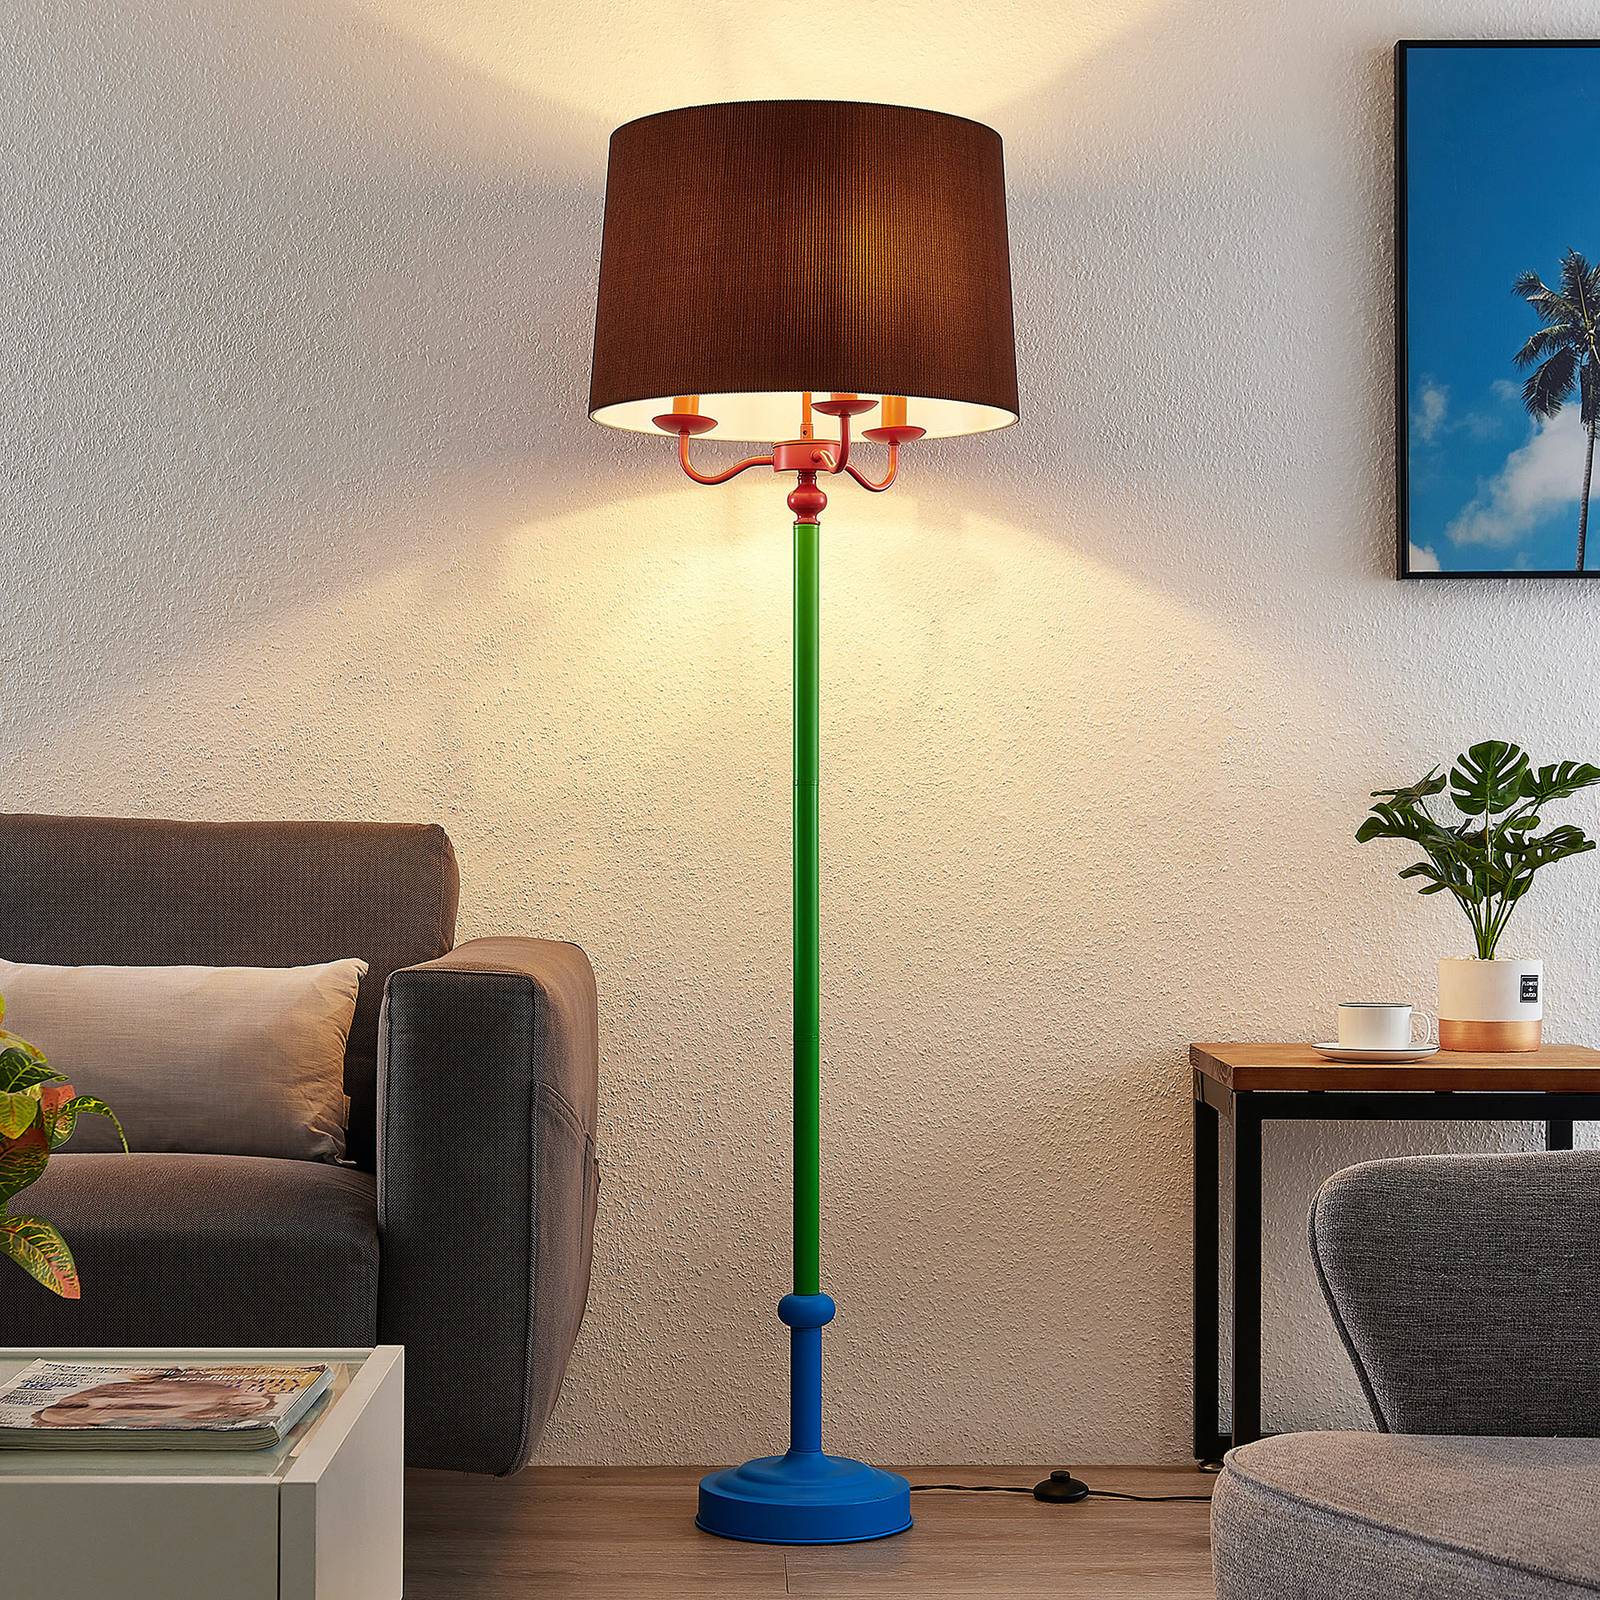 Lindby Christer lampadaire, multicolore, 160 cm